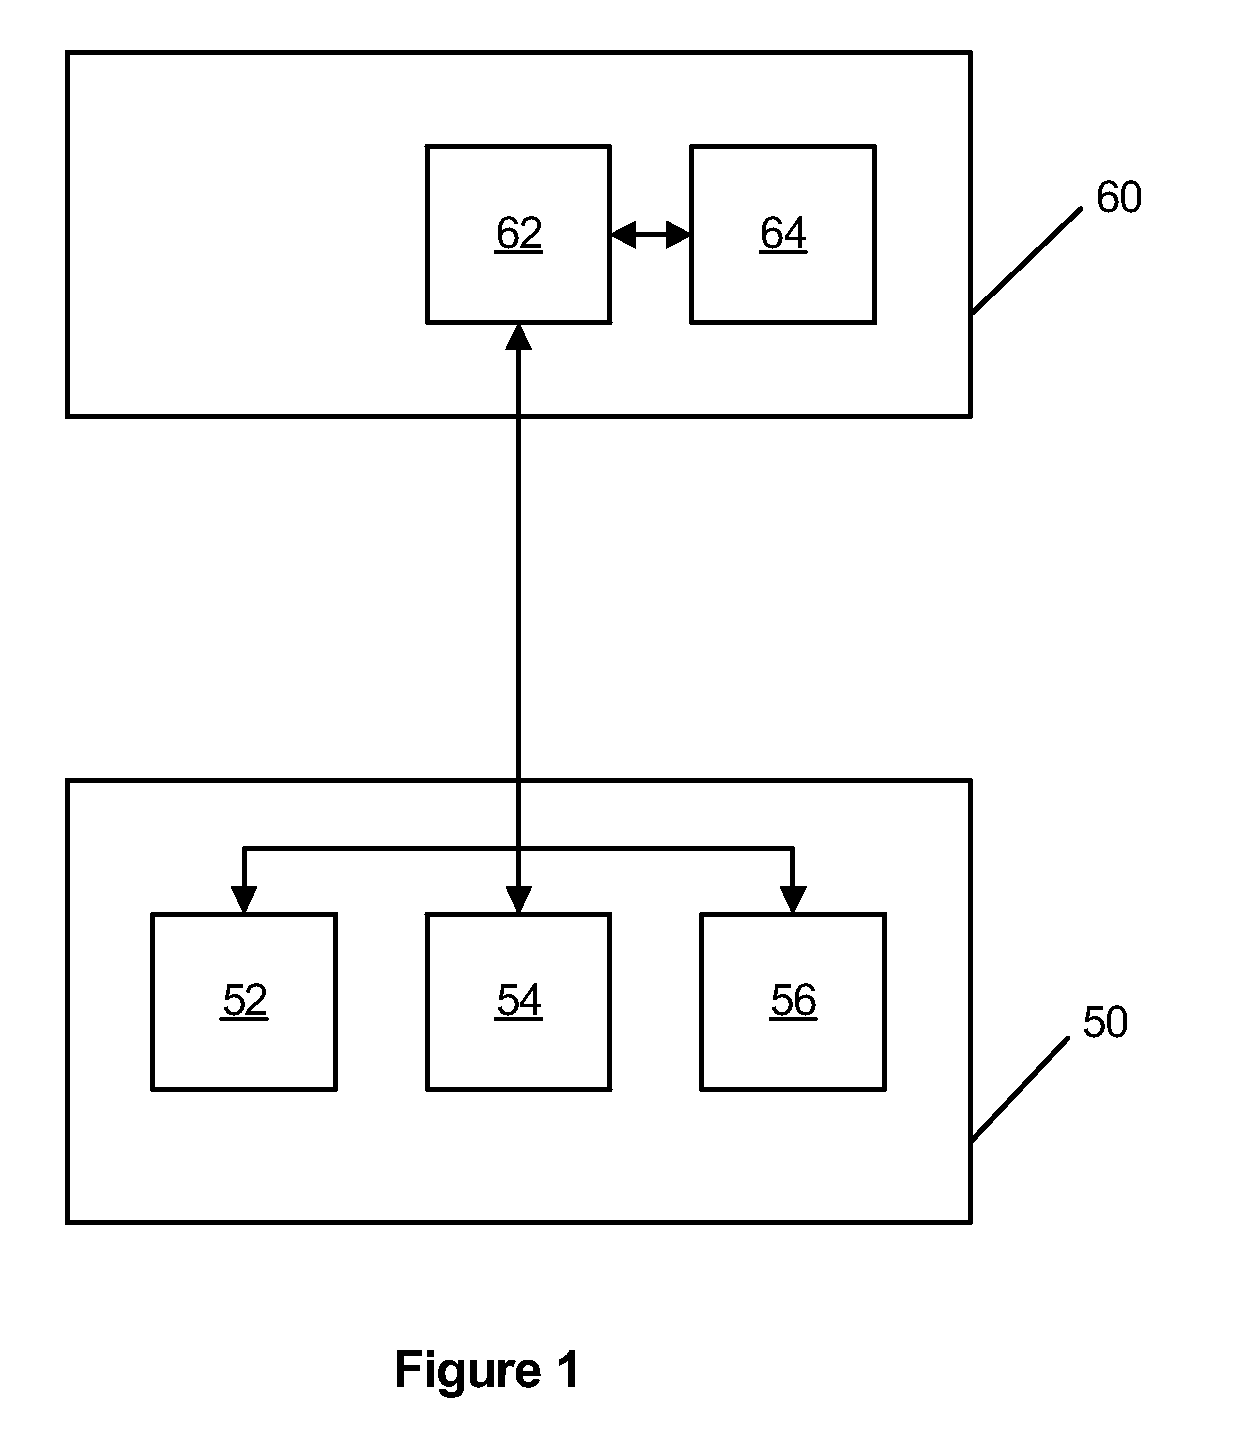 Gaming system and method of varying a jackpot game outcome